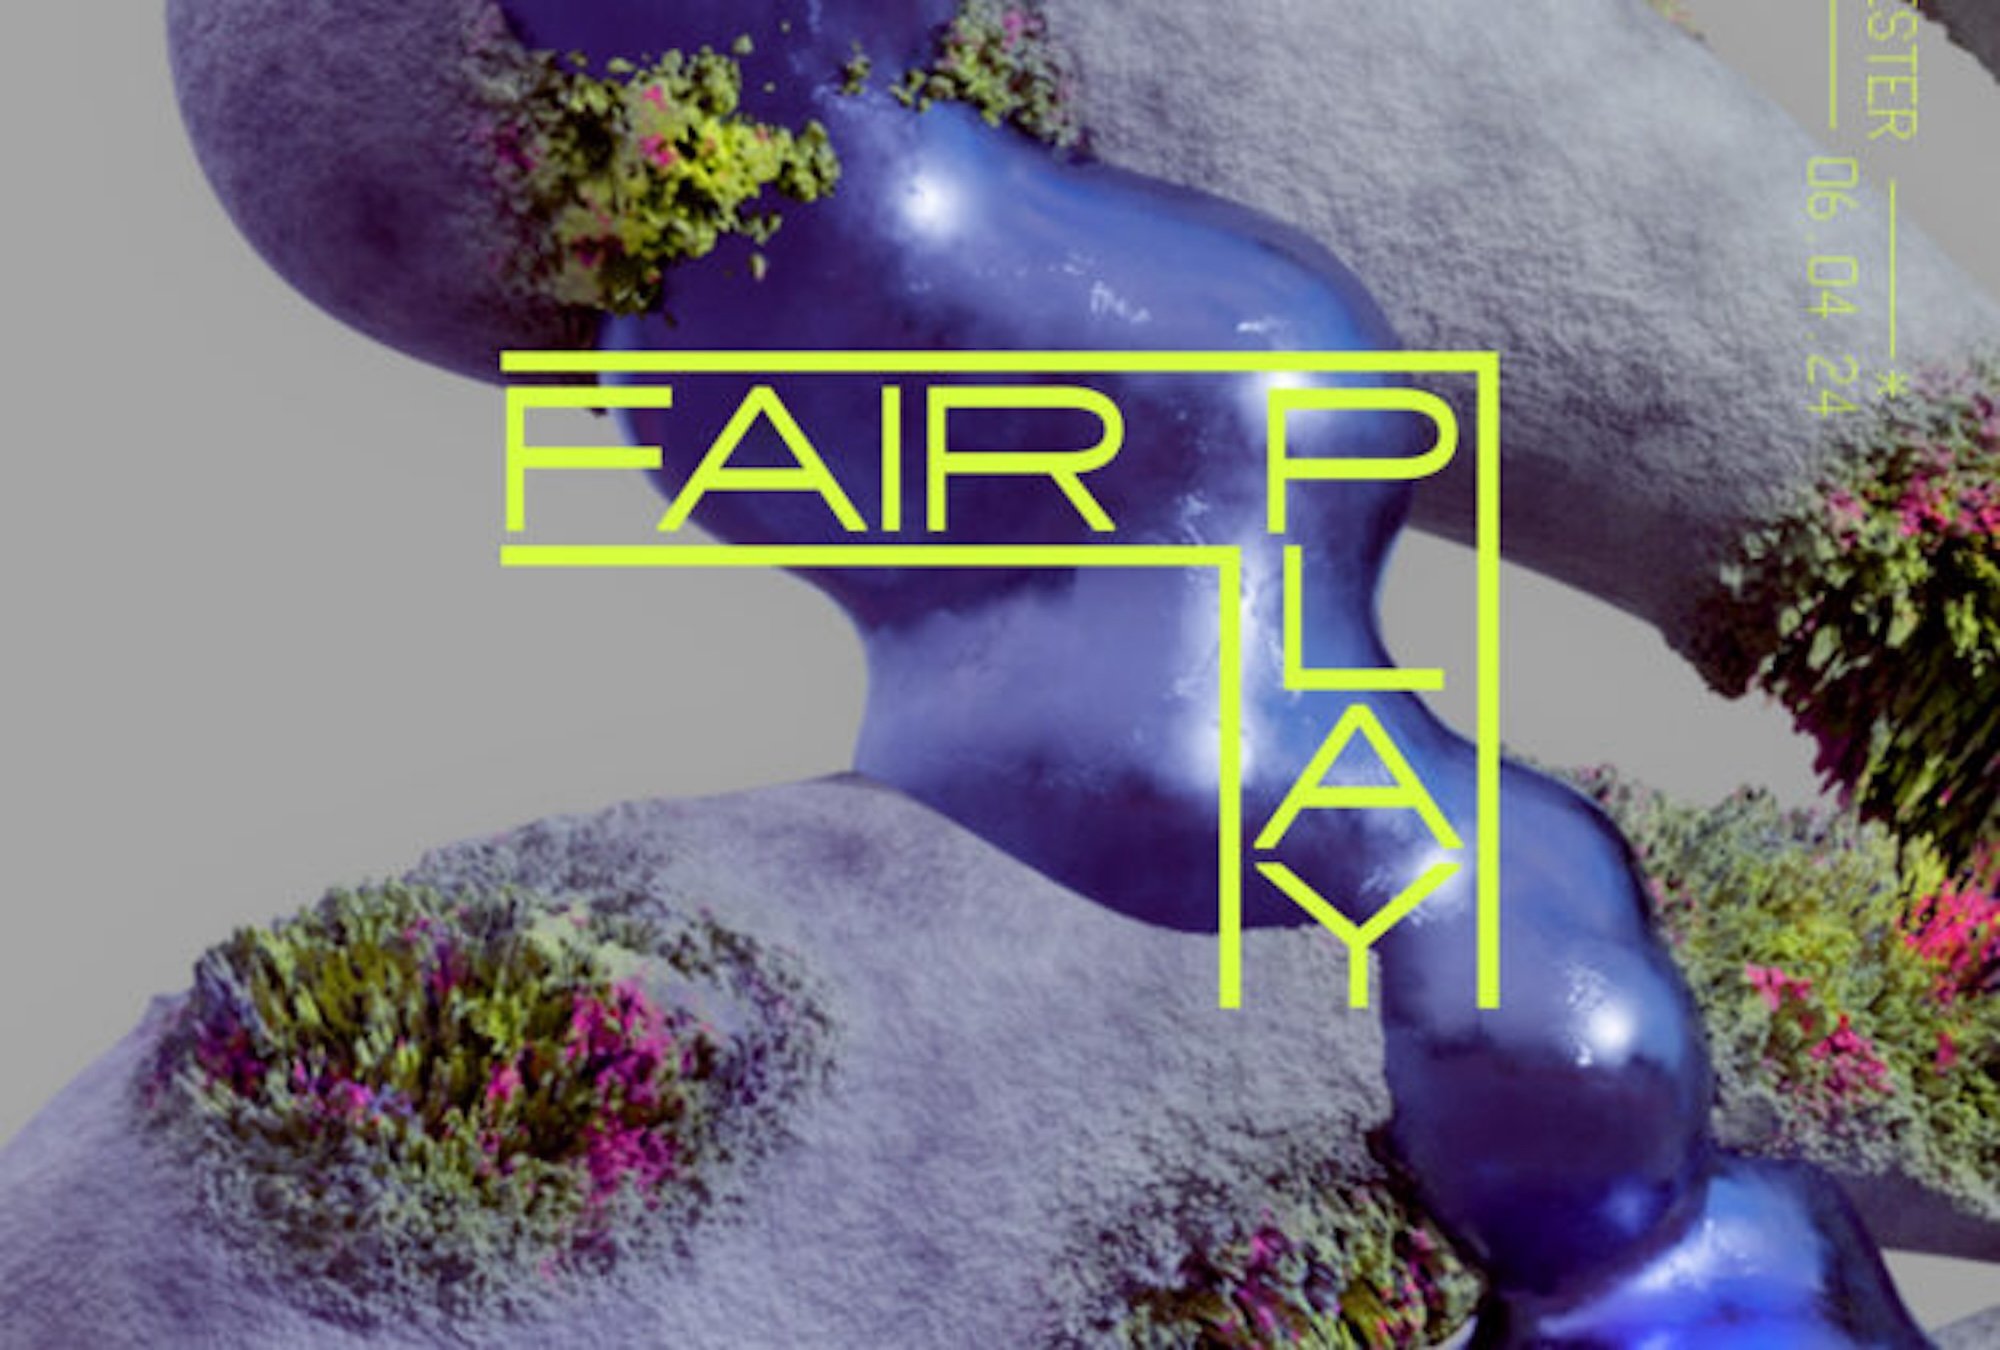 fair play festival is set across different venues in the Northern Quarter